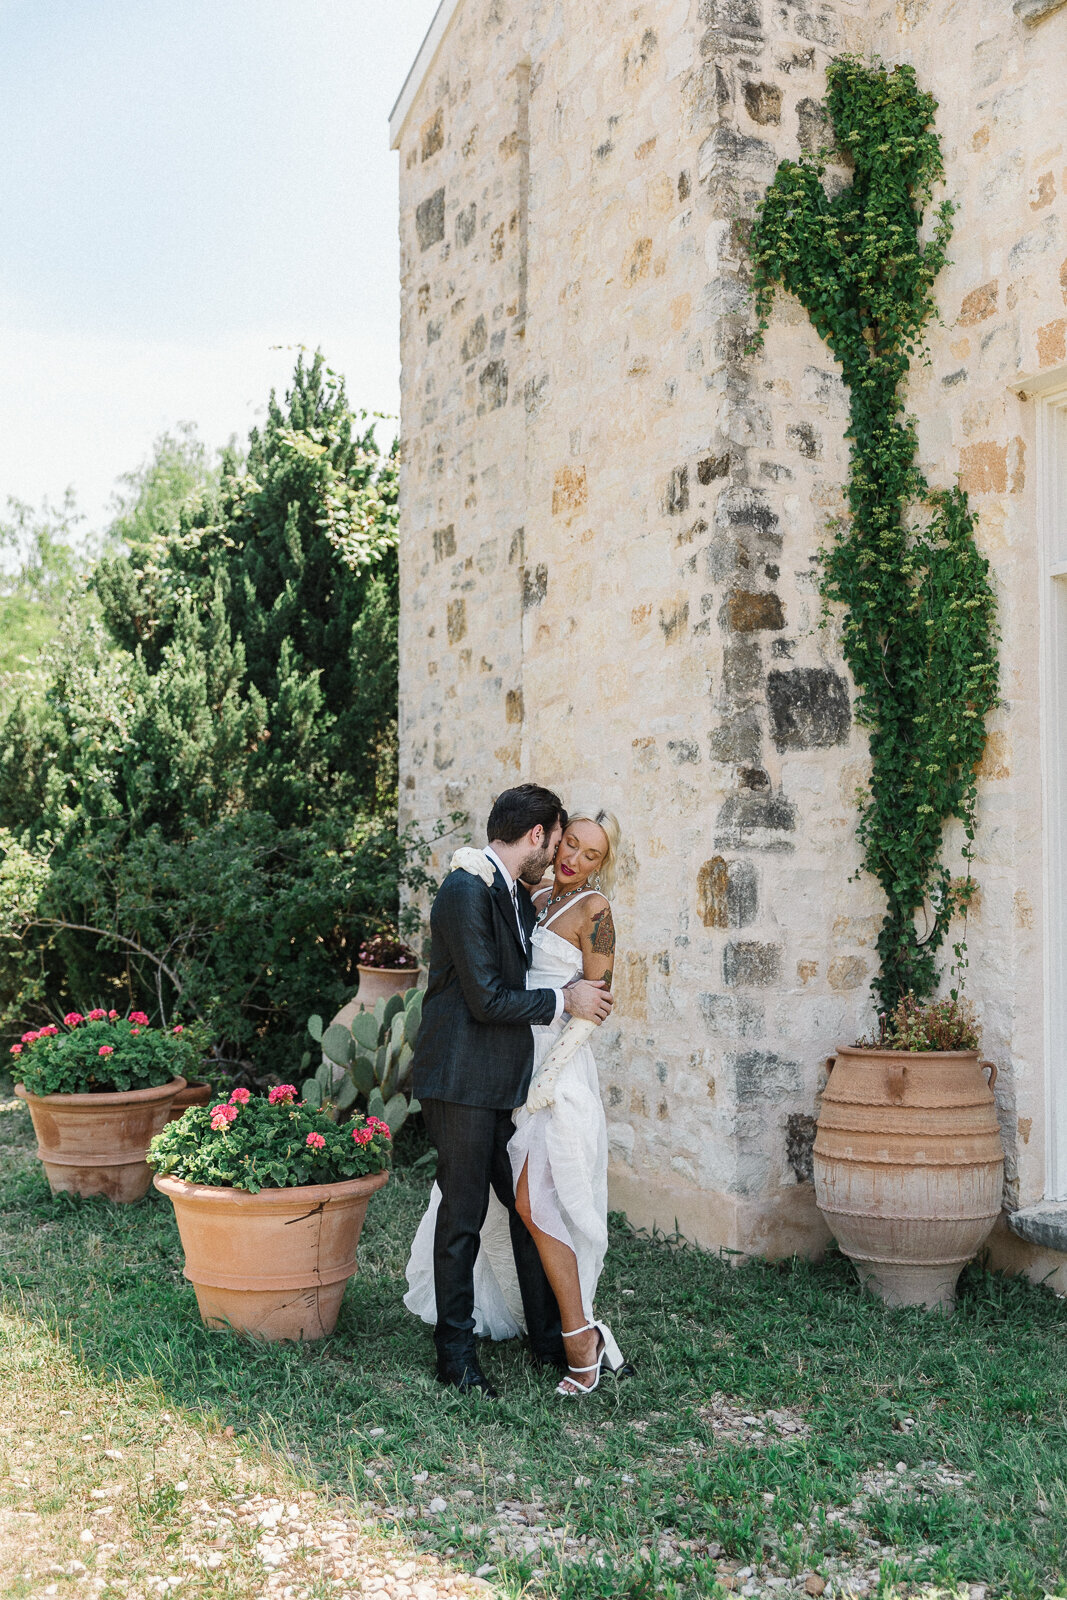 elopement in italy with beautiful vines and flower on house